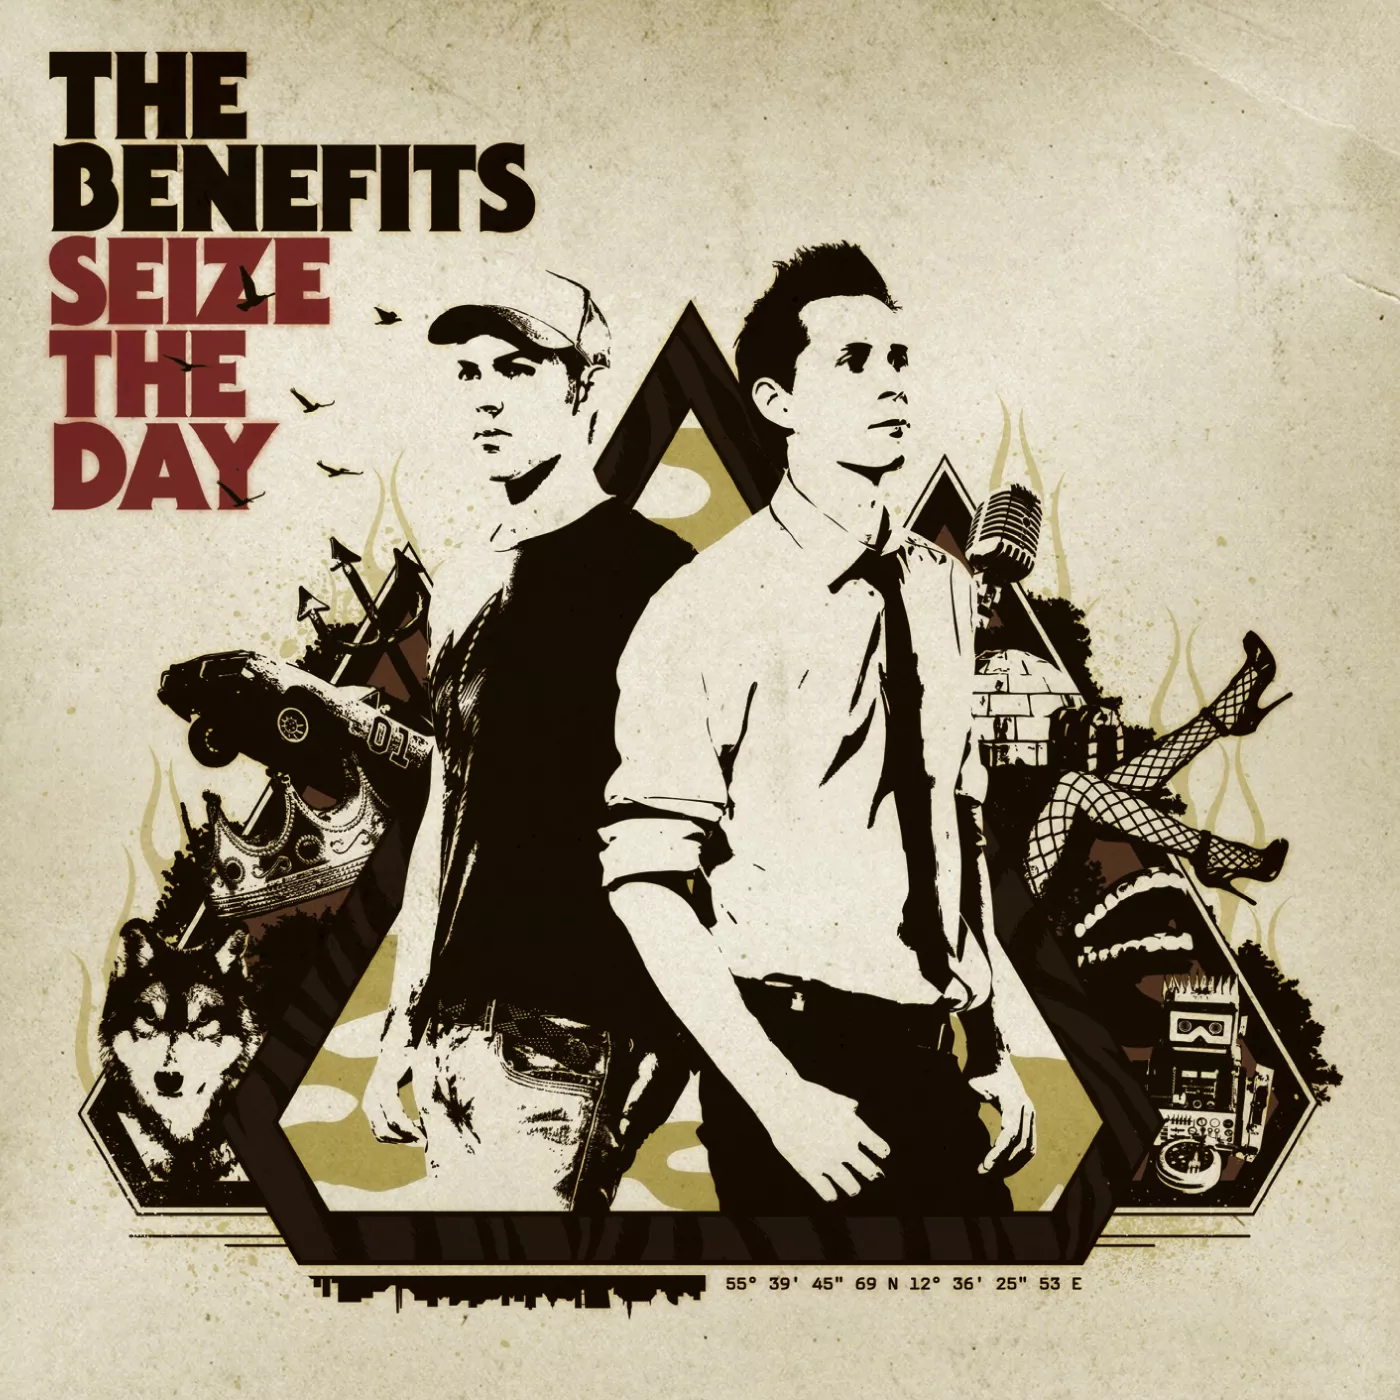 Seize The Day - The Benefits